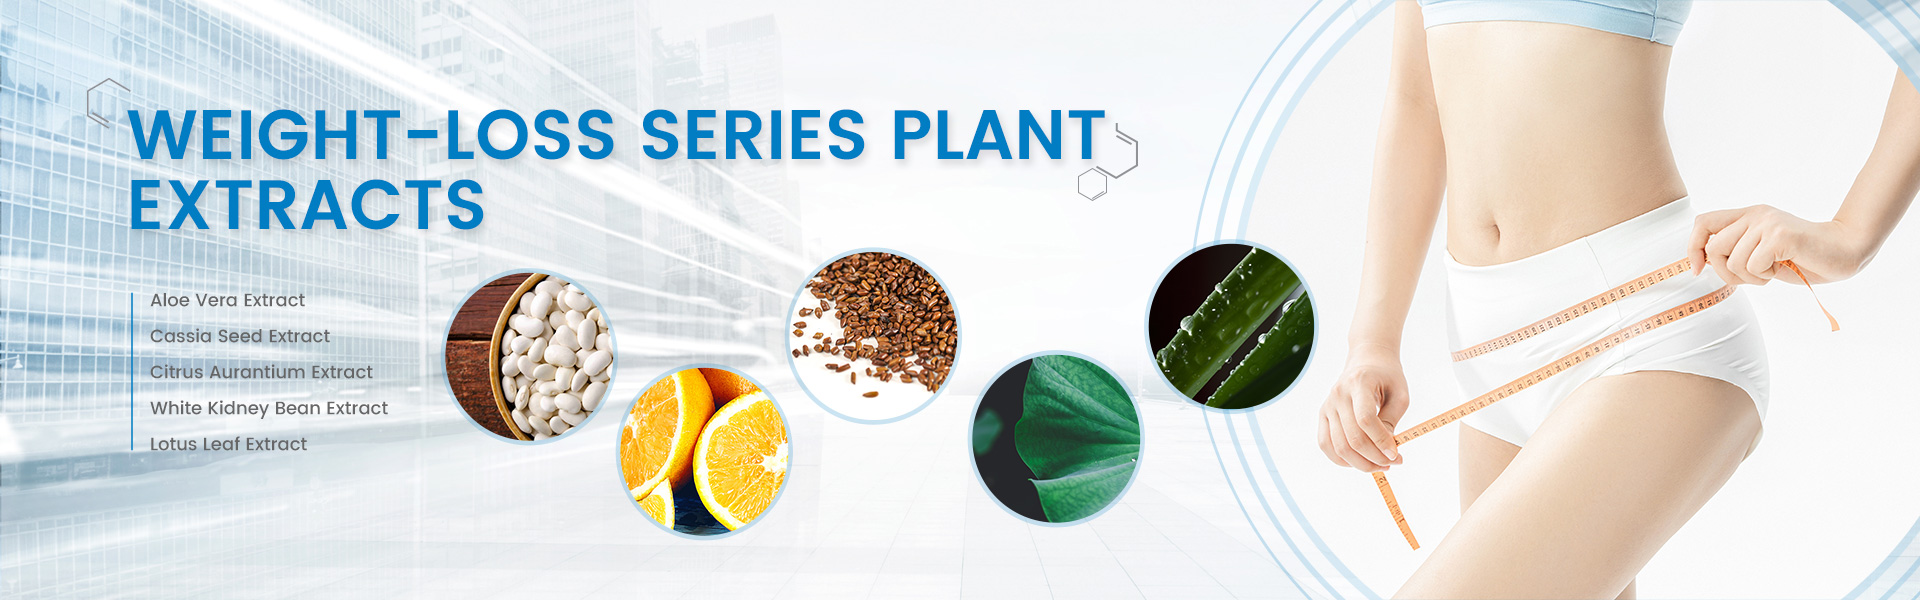 WEIGHT-LOSS-SERIES-PLANT-EXTRACTS